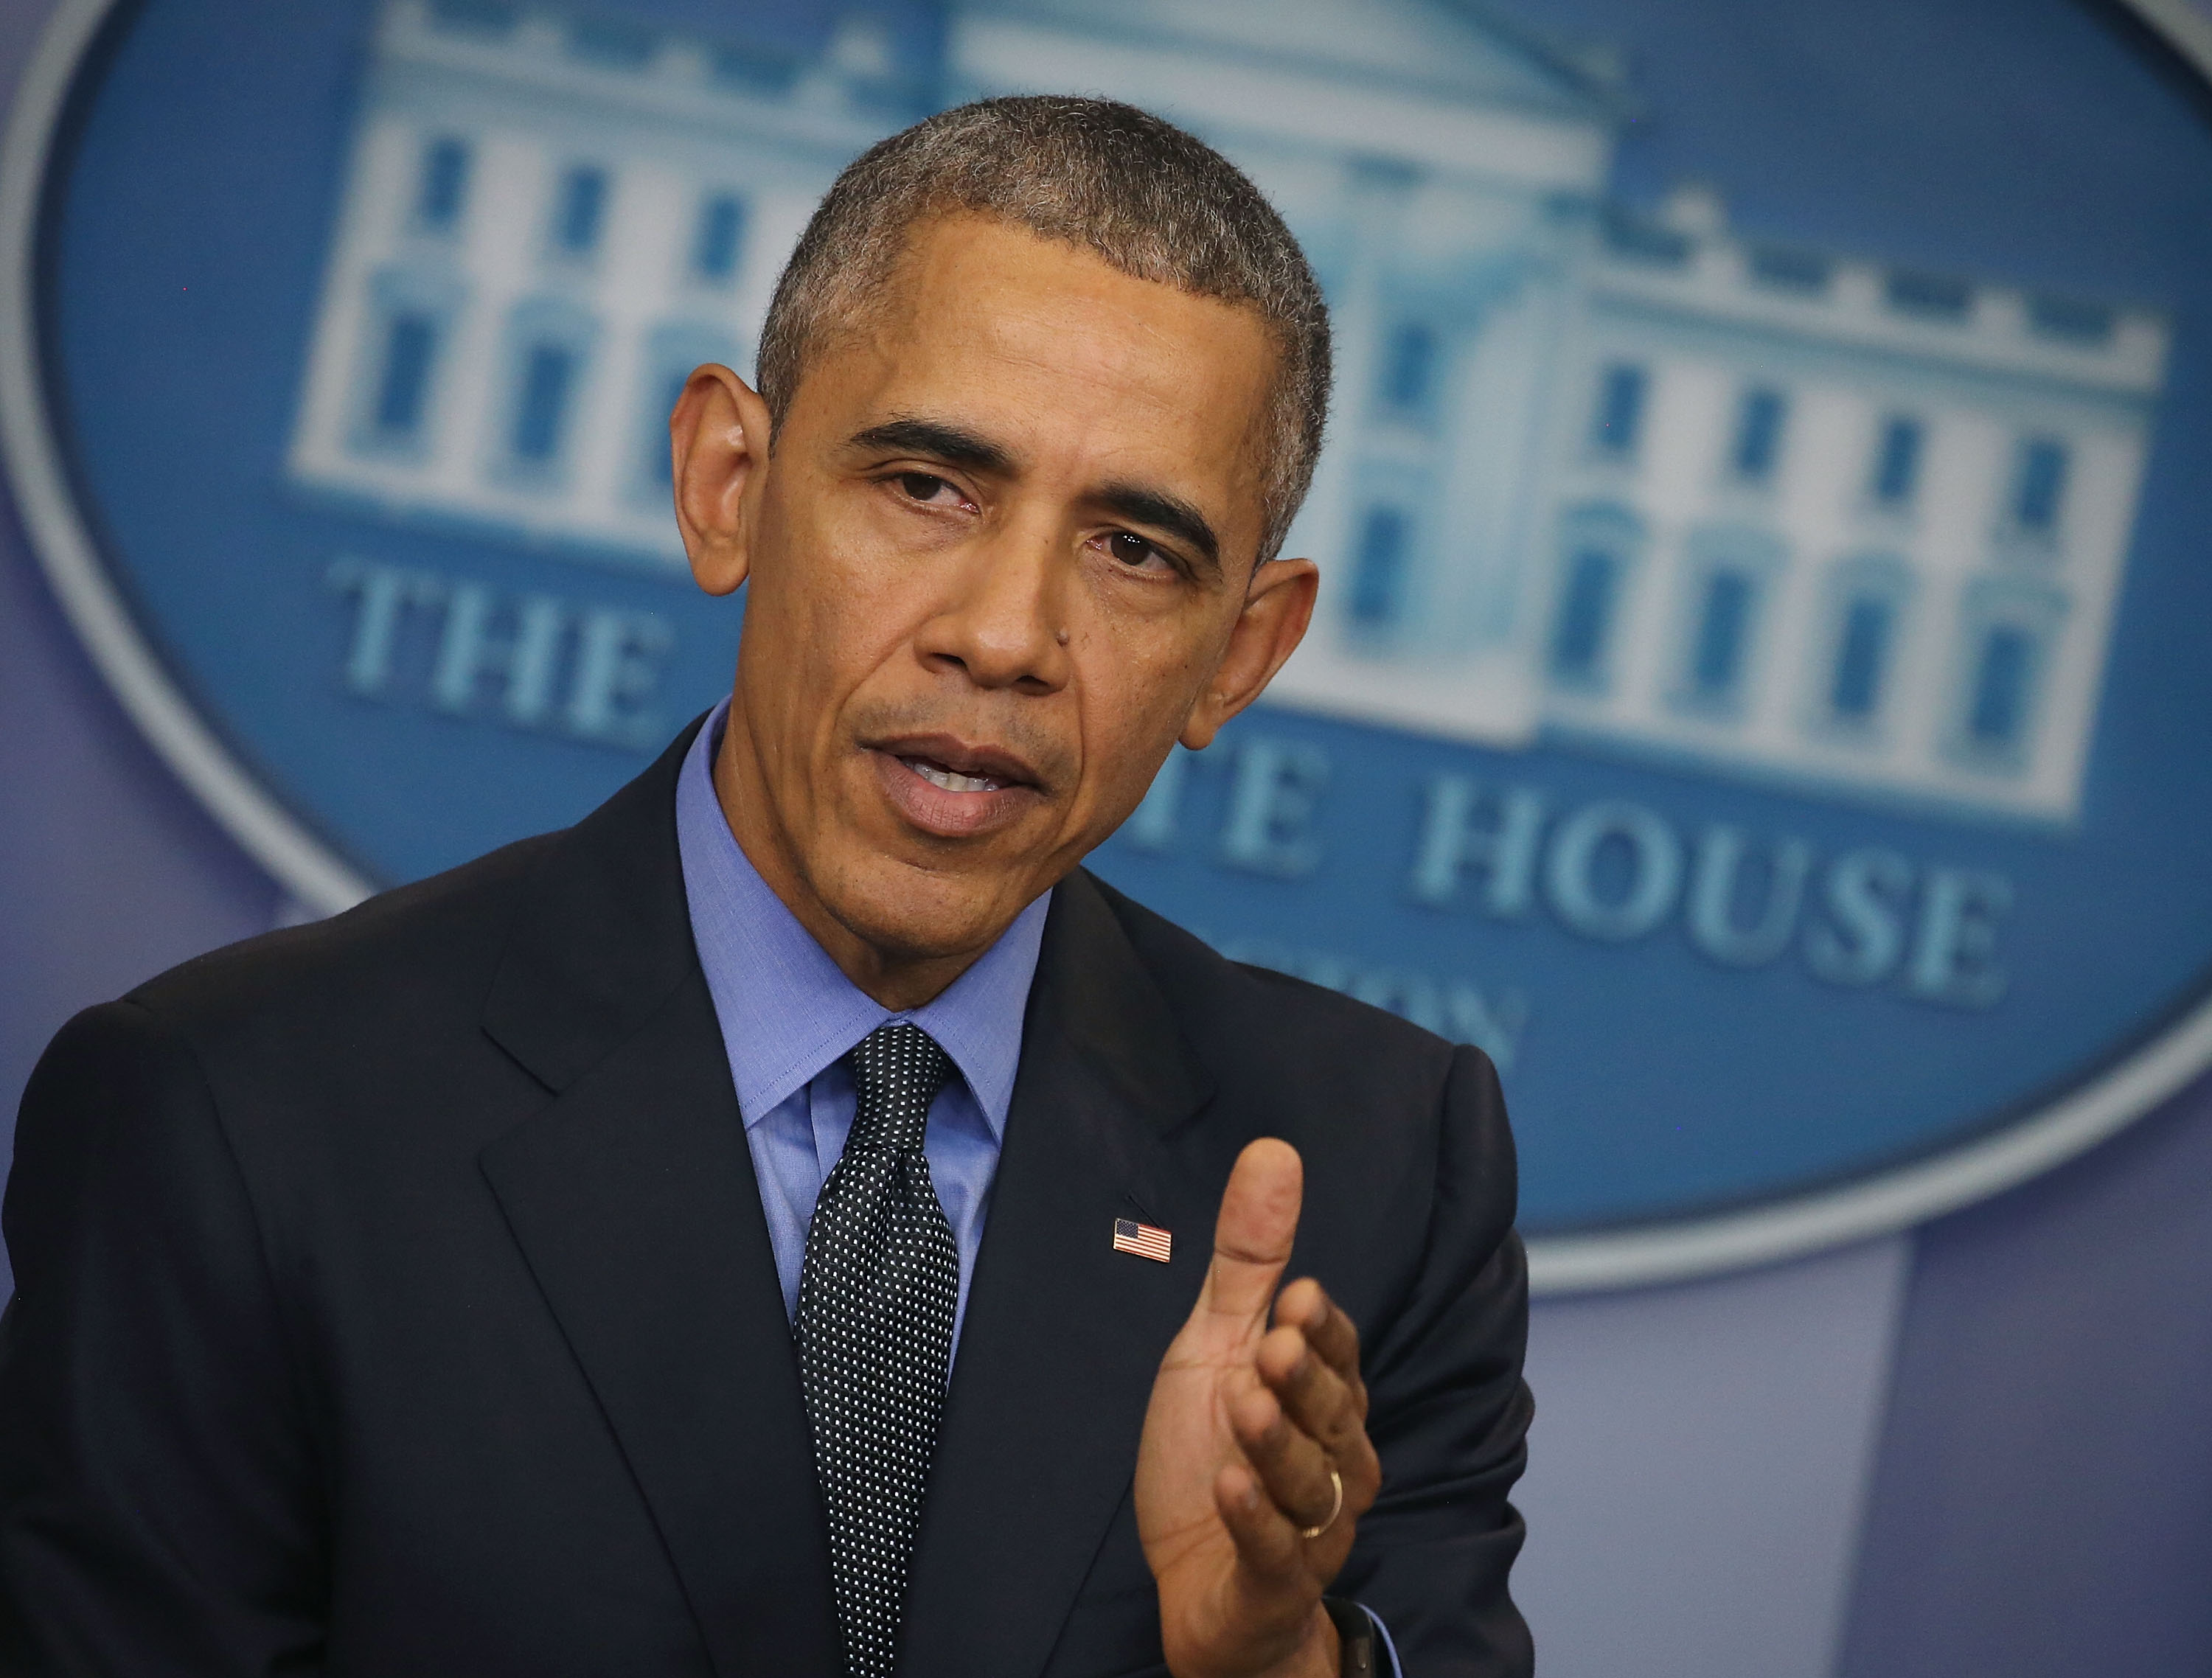 President Obama speaks to the media at the White House on Dec. 18, 2015 in Washington, DC. (Mark Wilson—Getty Images)